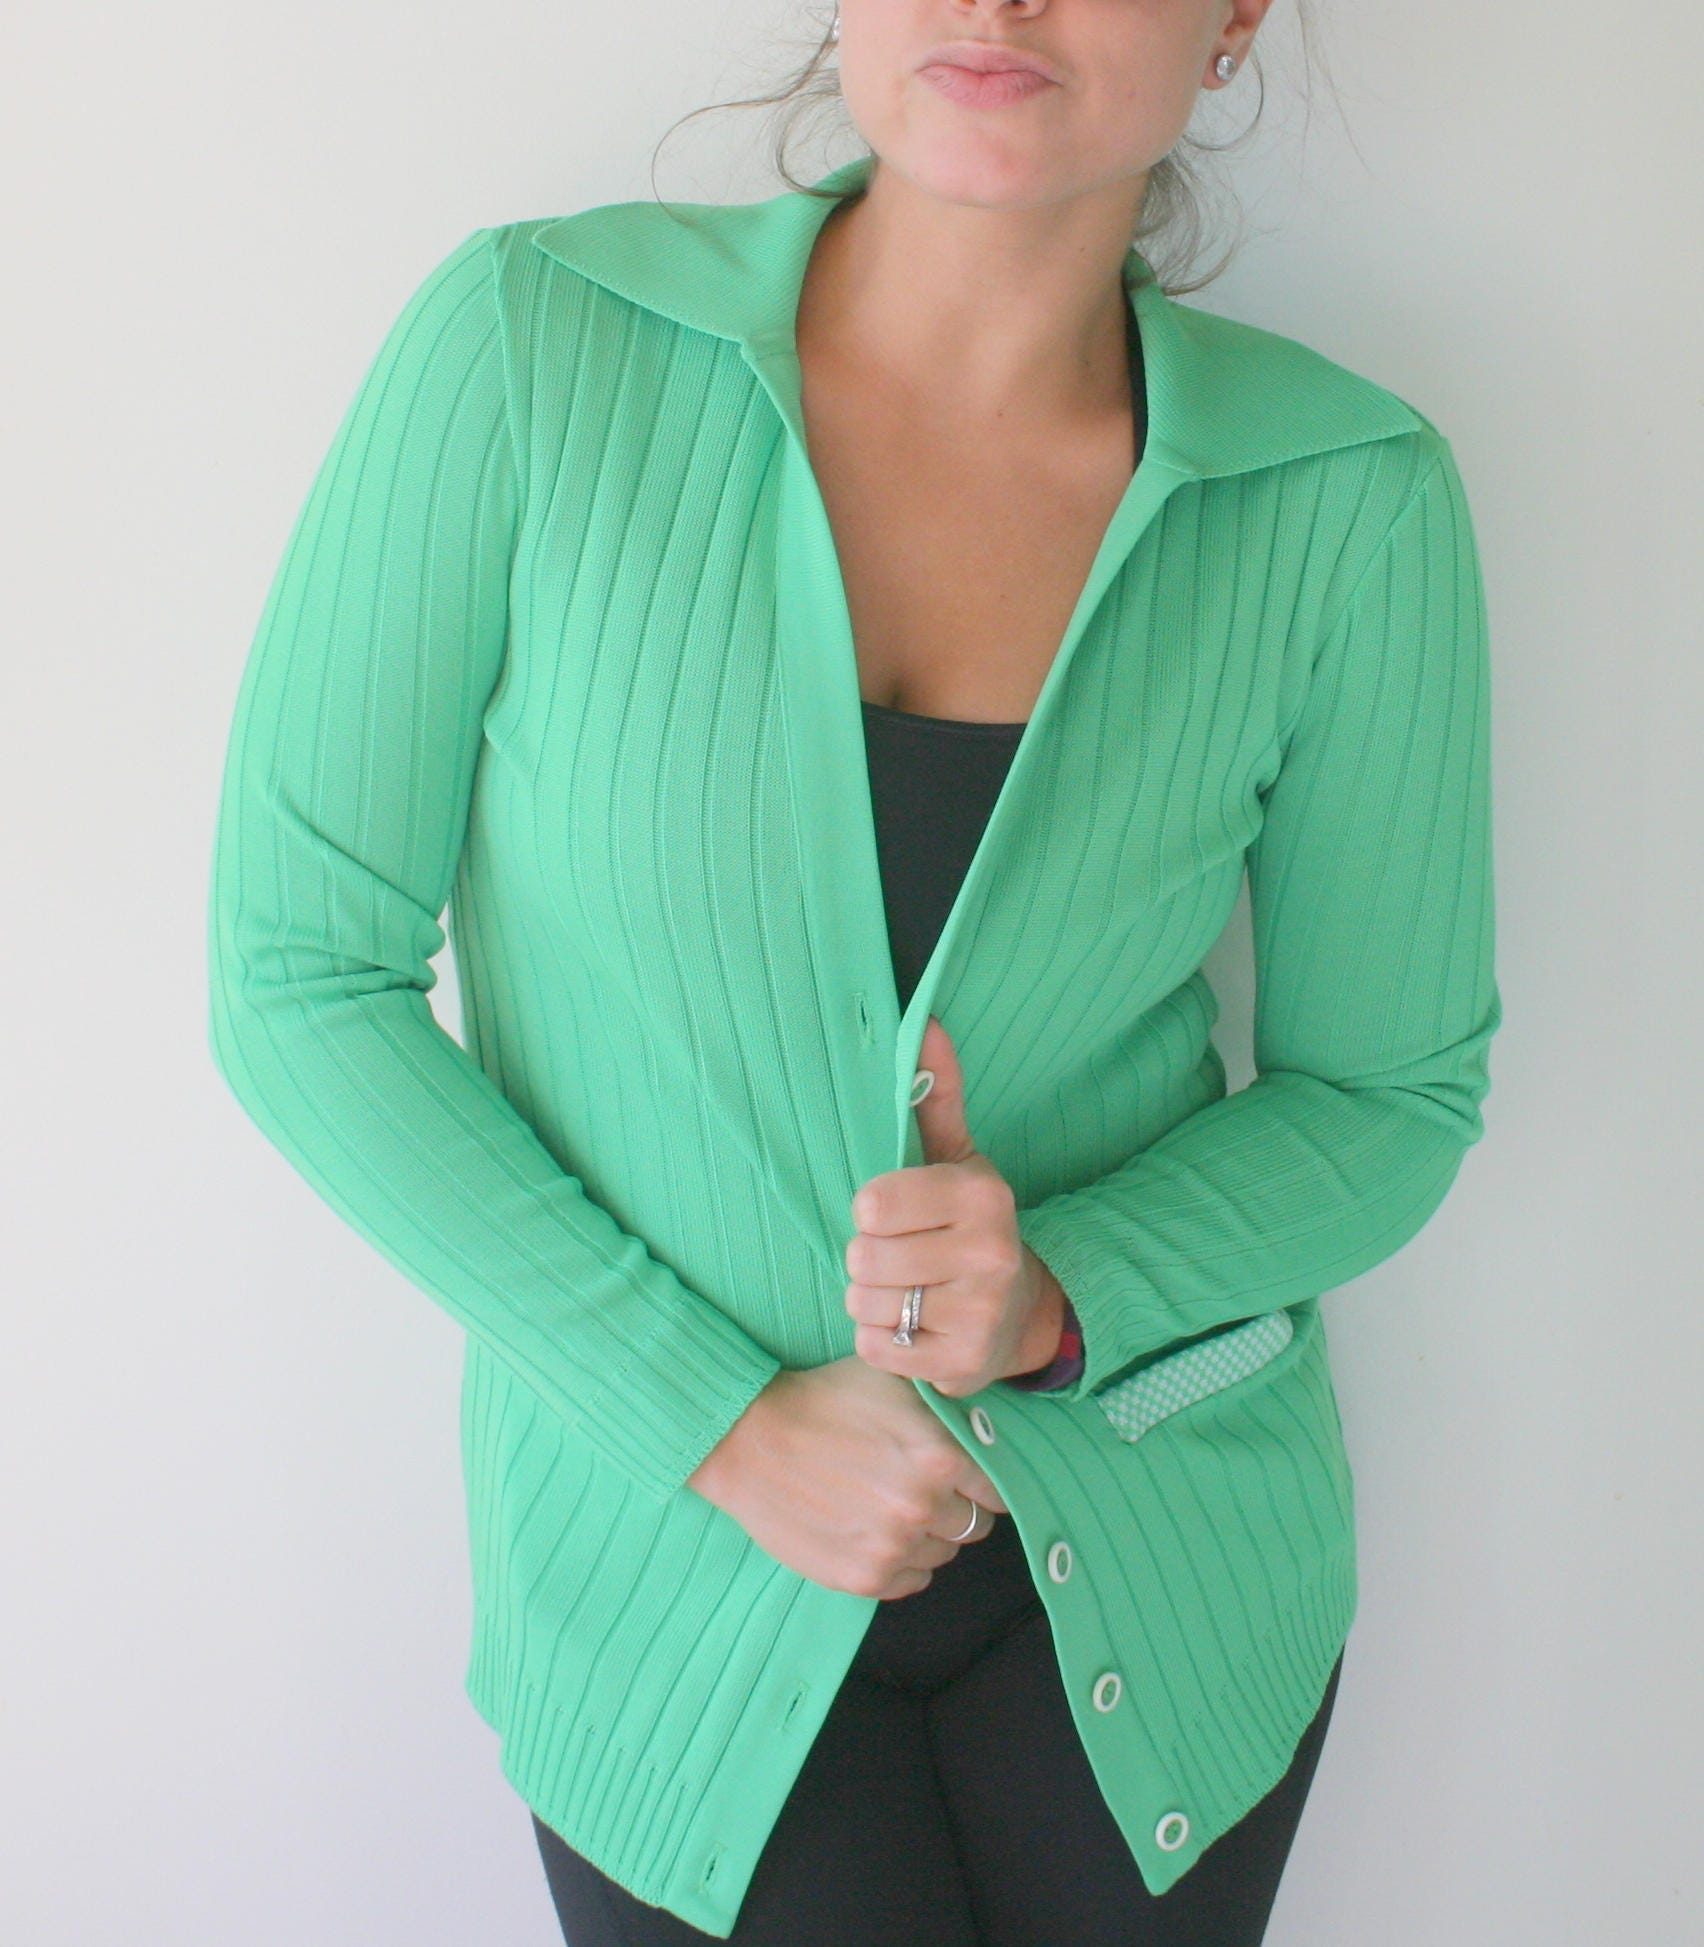 Early 80s style: Preppy monogrammed sweaters in kelly green and